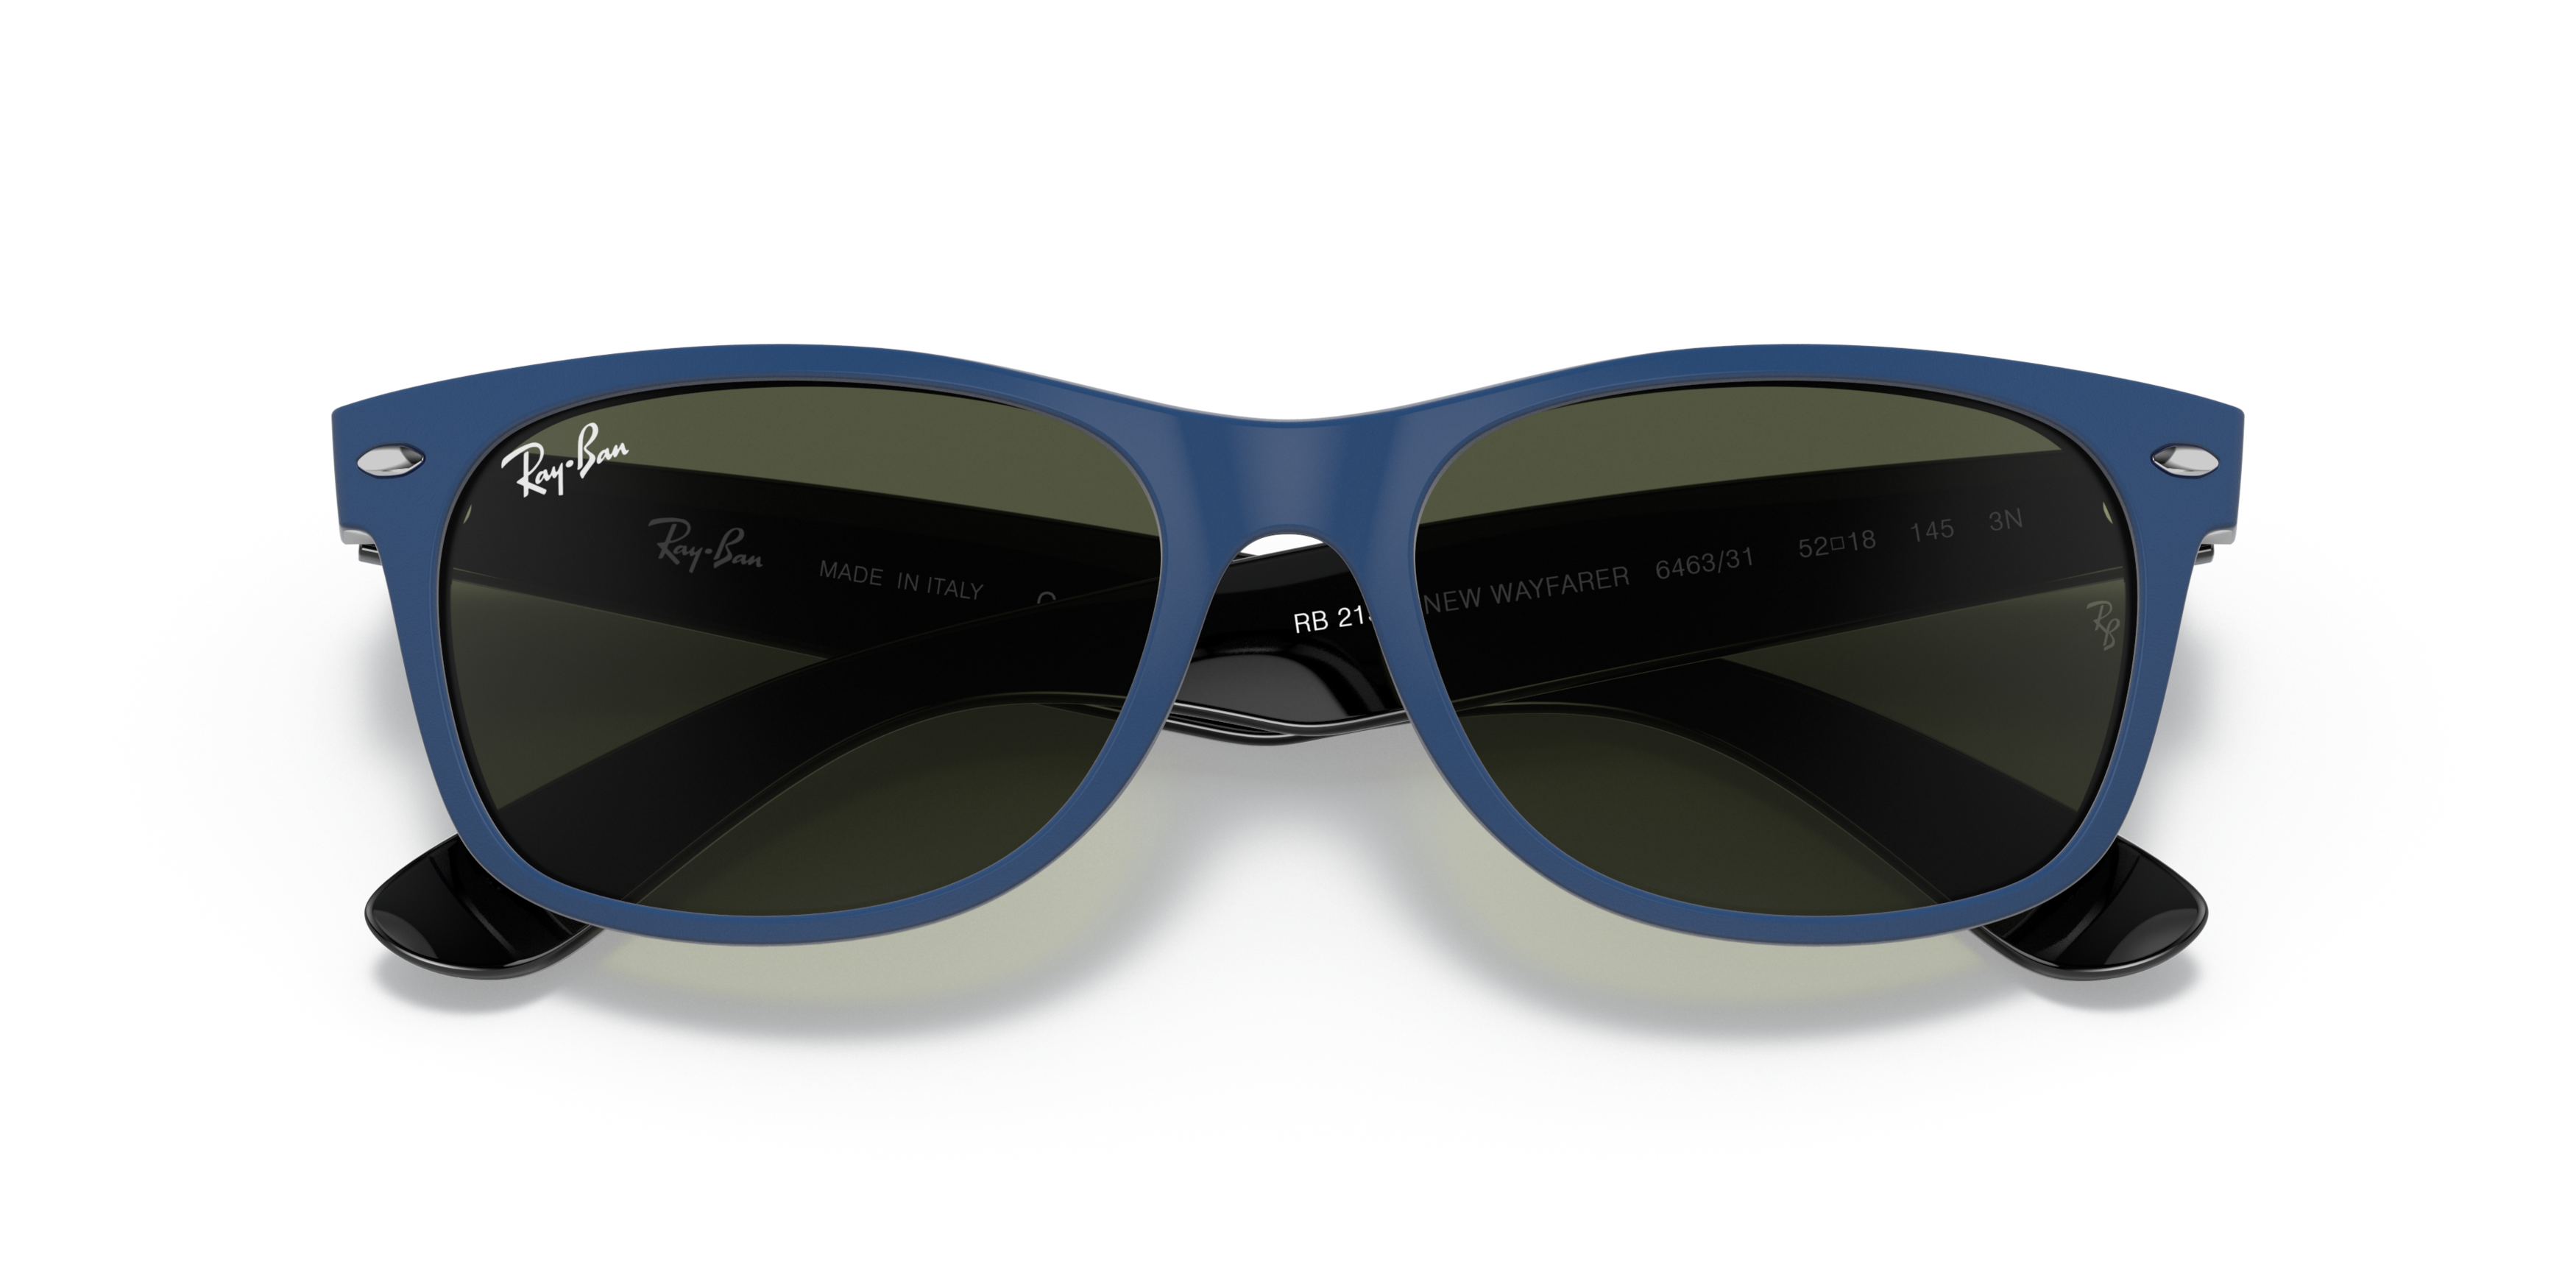 [products.image.folded] Ray-Ban New Wayfarer Color Mix RB2132 646331